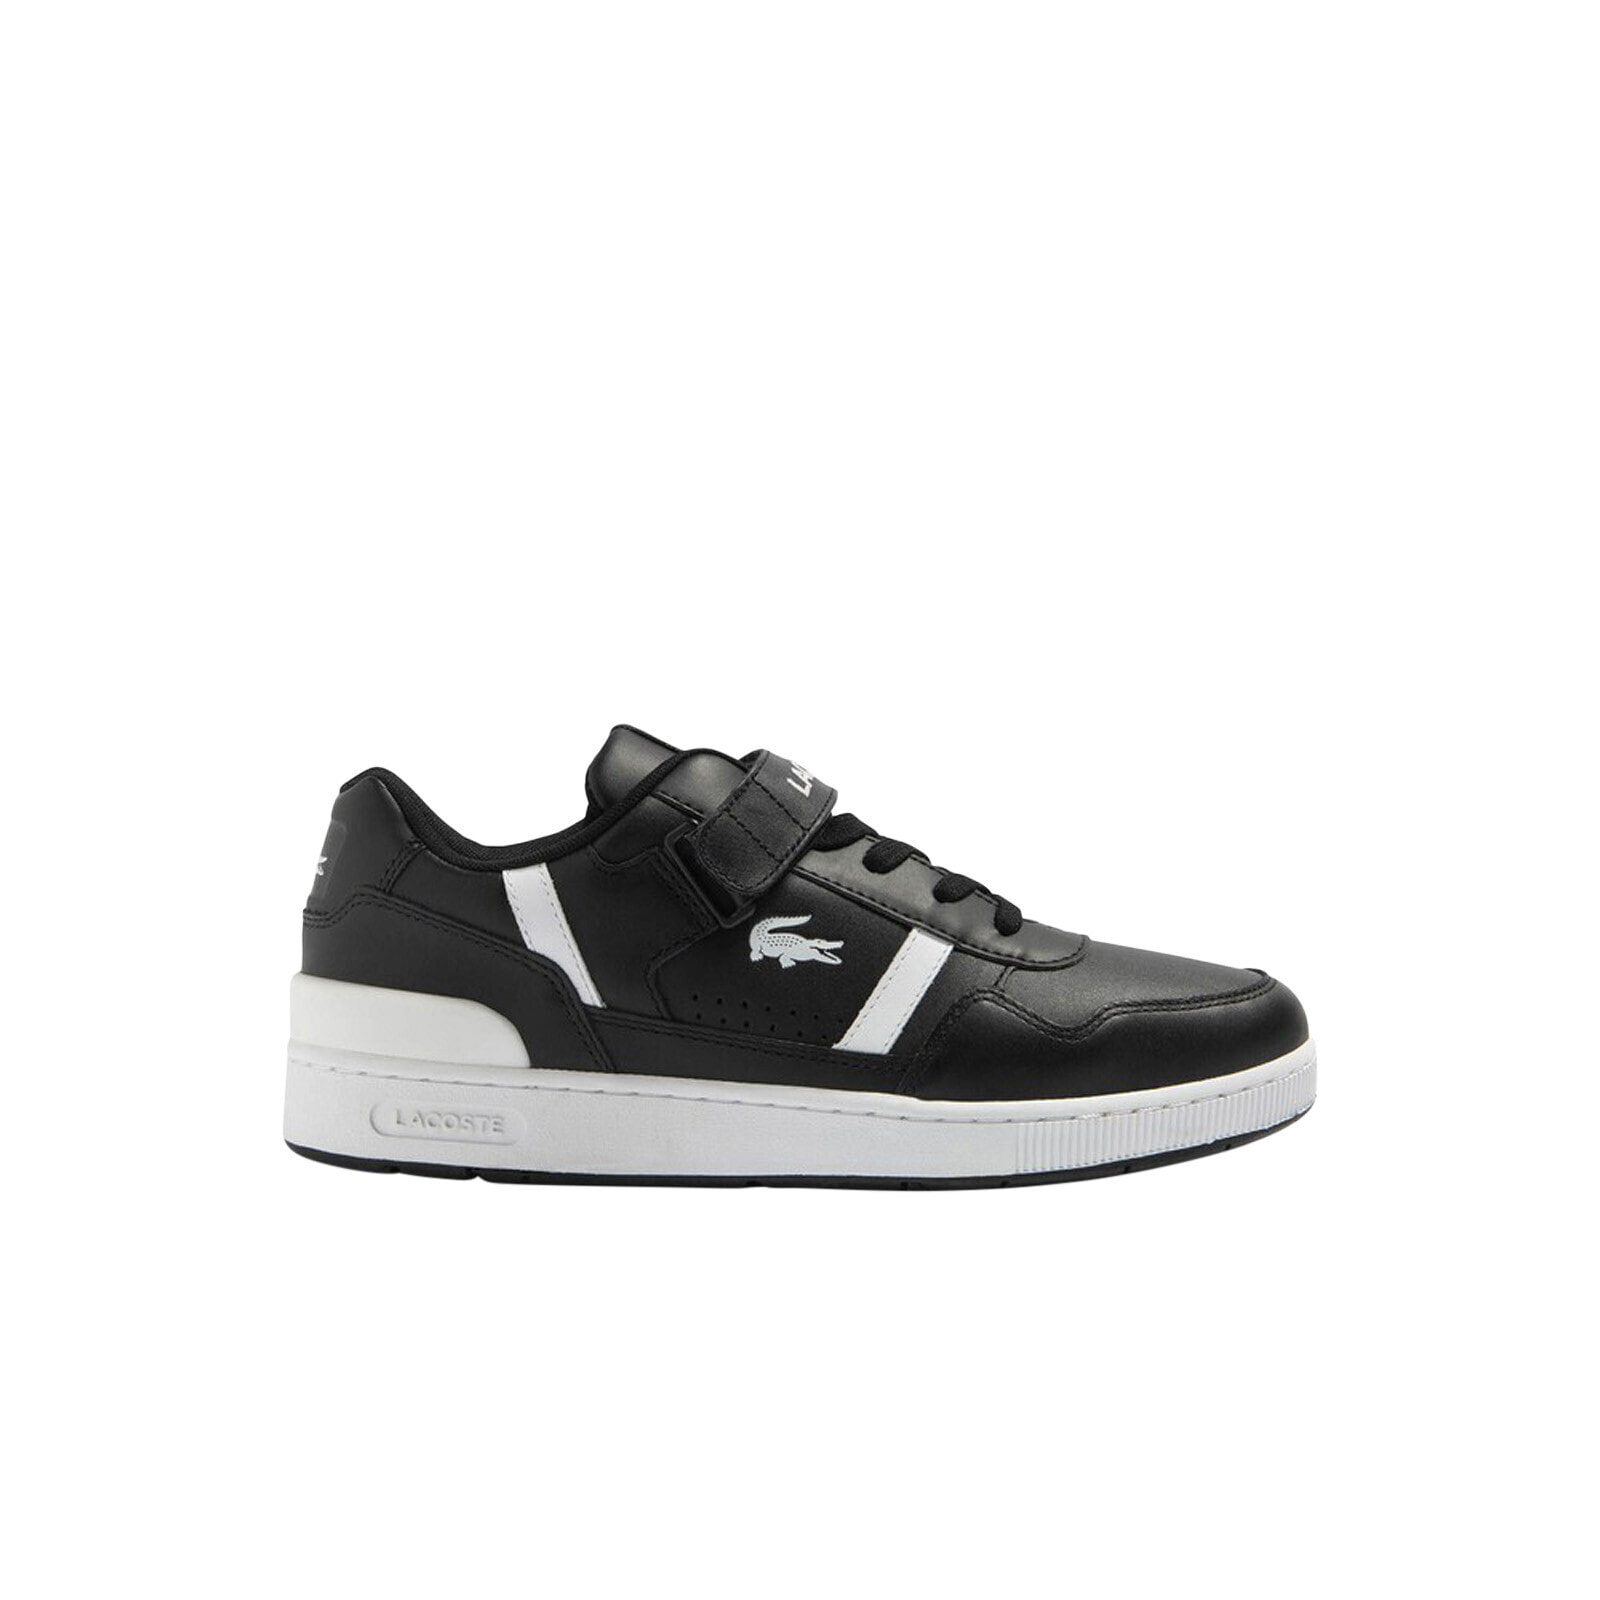 Lacoste T-Clip Vlc 223 1 SMA Mens Black Leather Lifestyle Sneakers Shoes